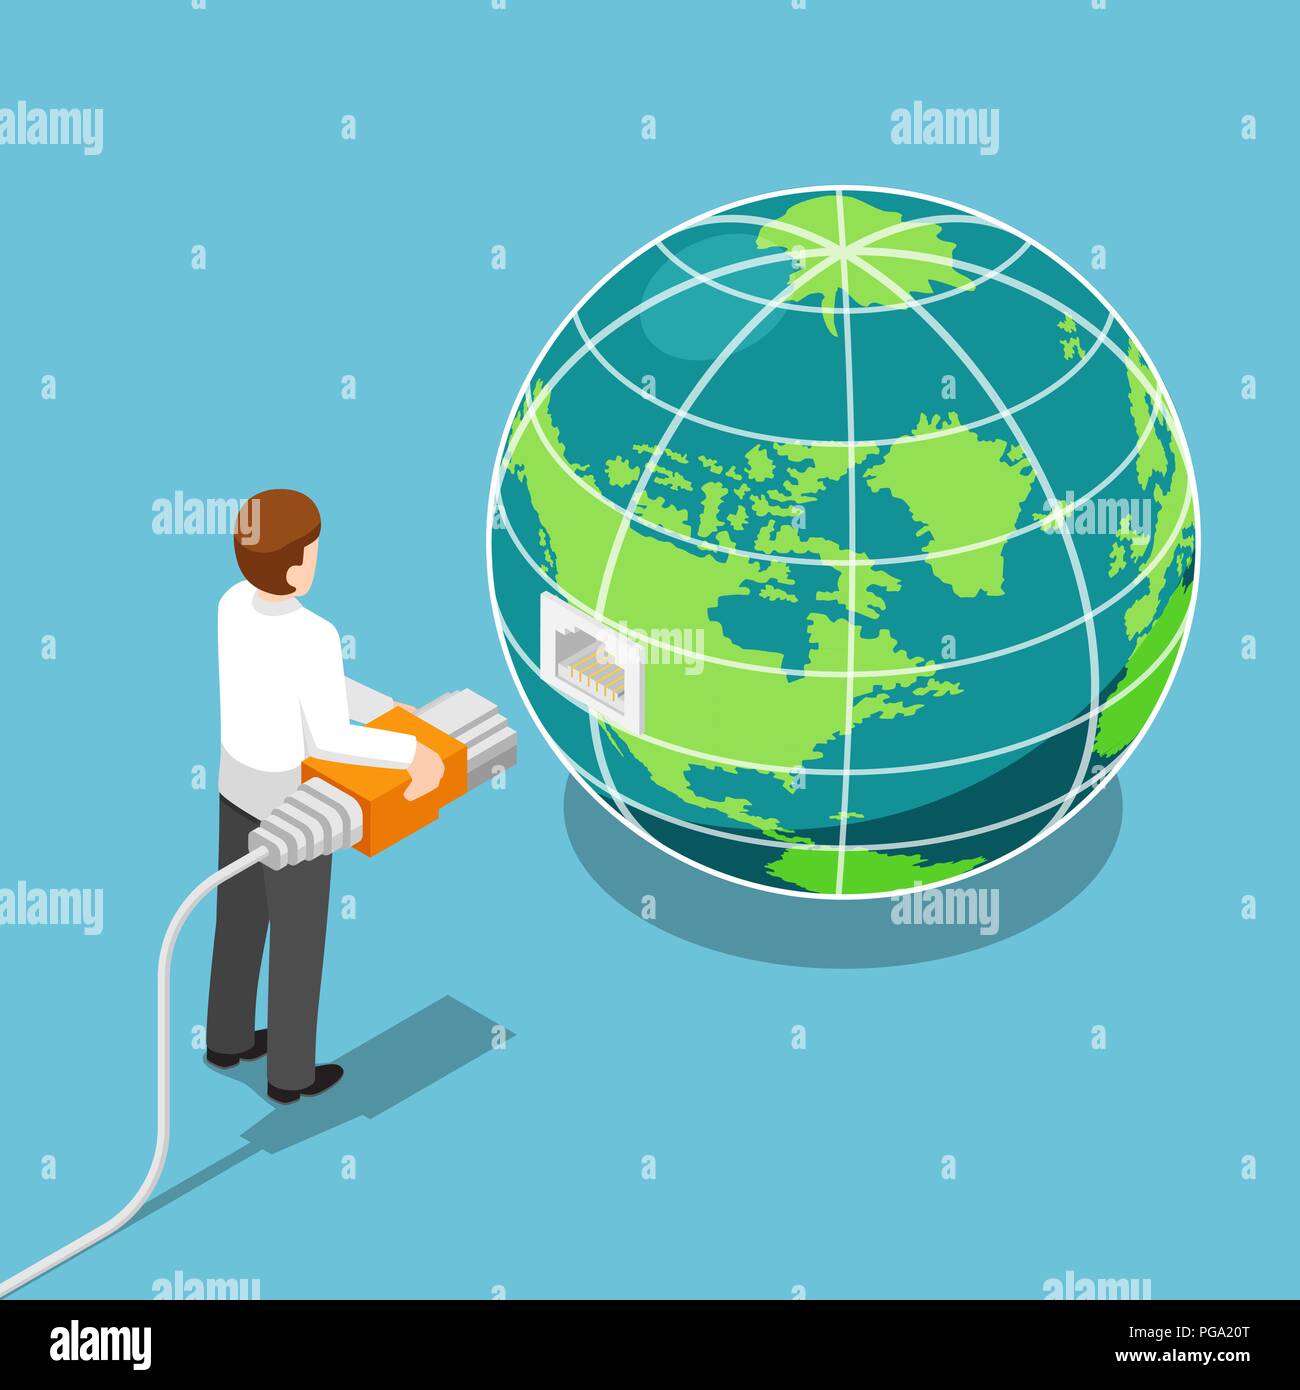 Flat 3d isometric businessman connecting network cable to the world. Global communication and network connection concept. Stock Vector